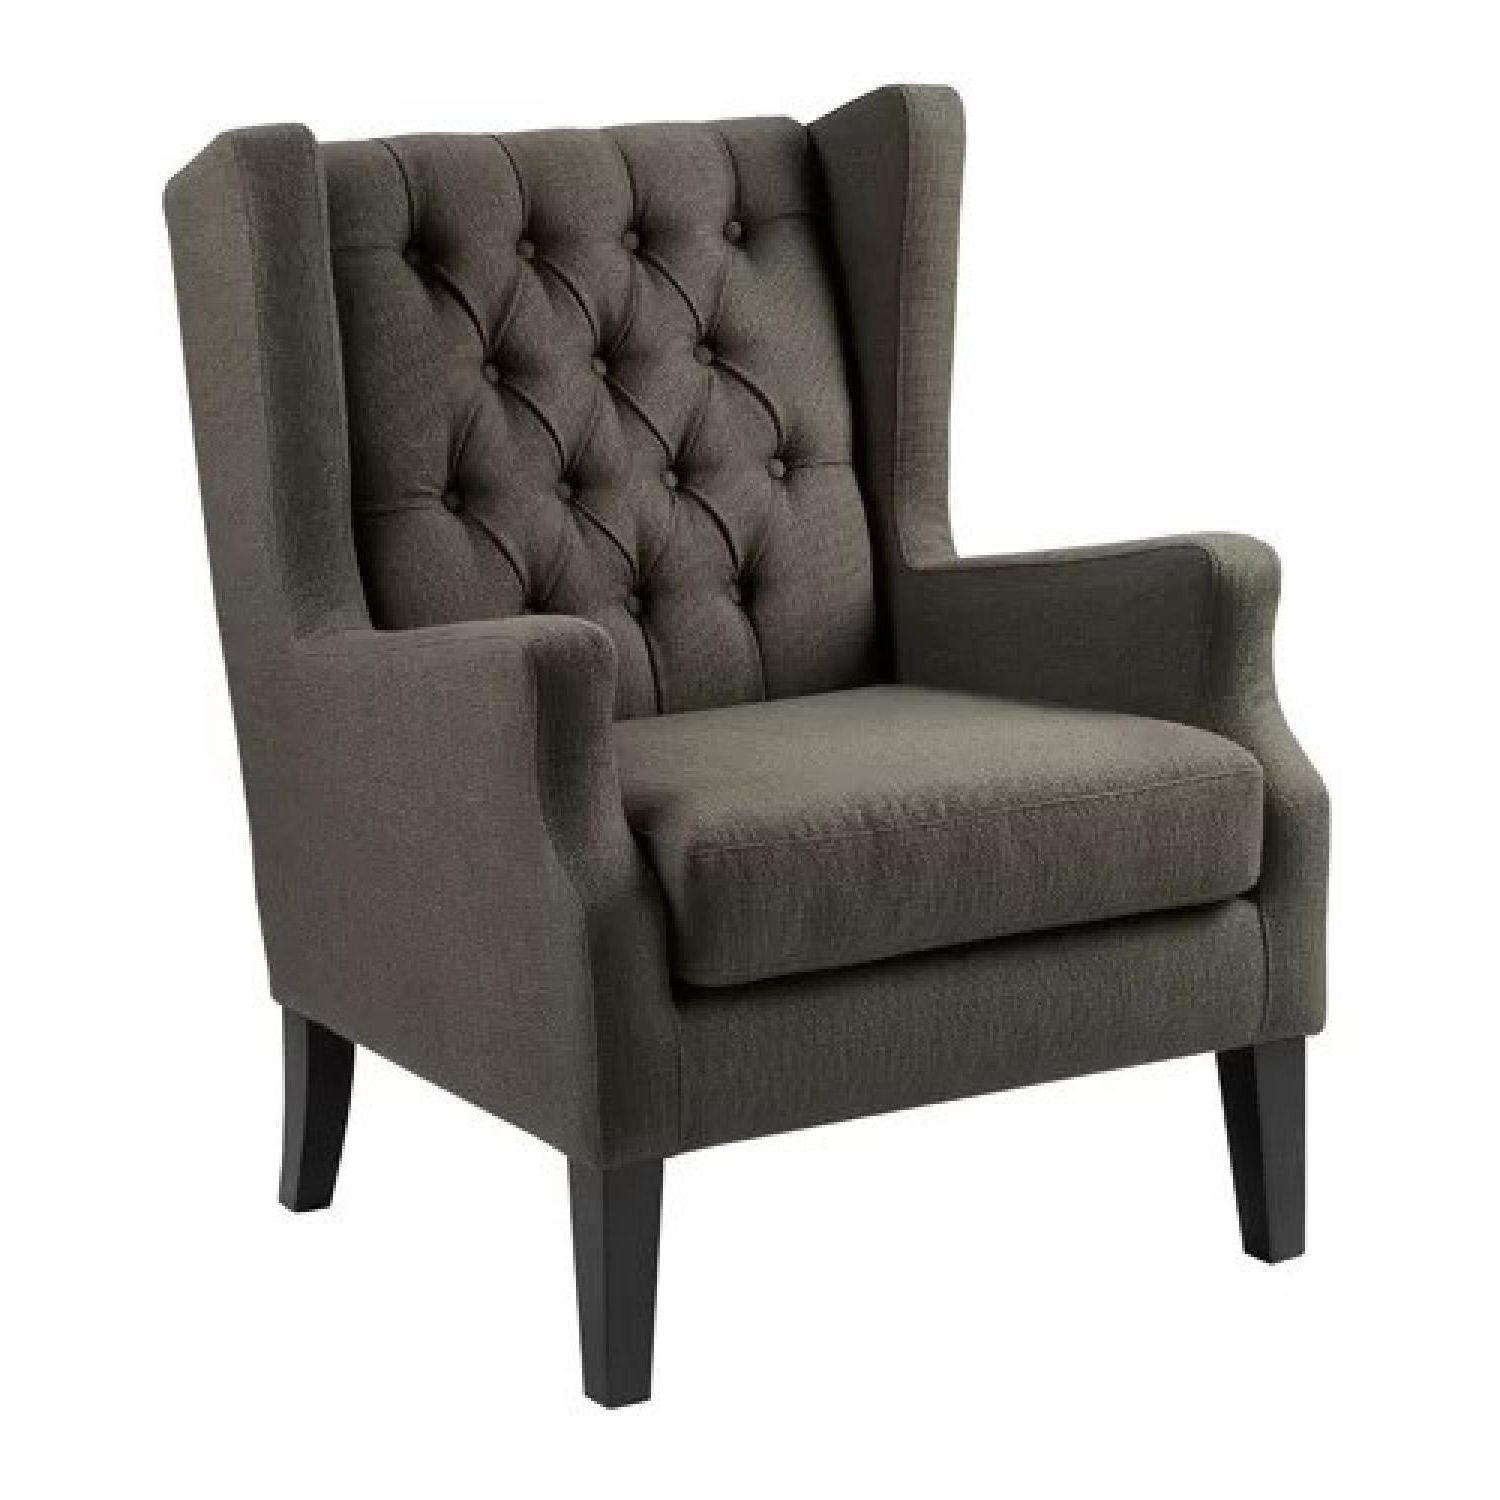 Allis Tufted Polyester Blend Wingback Chairs Pertaining To Well Known Threes Post Allis Wingback Chair (View 3 of 20)